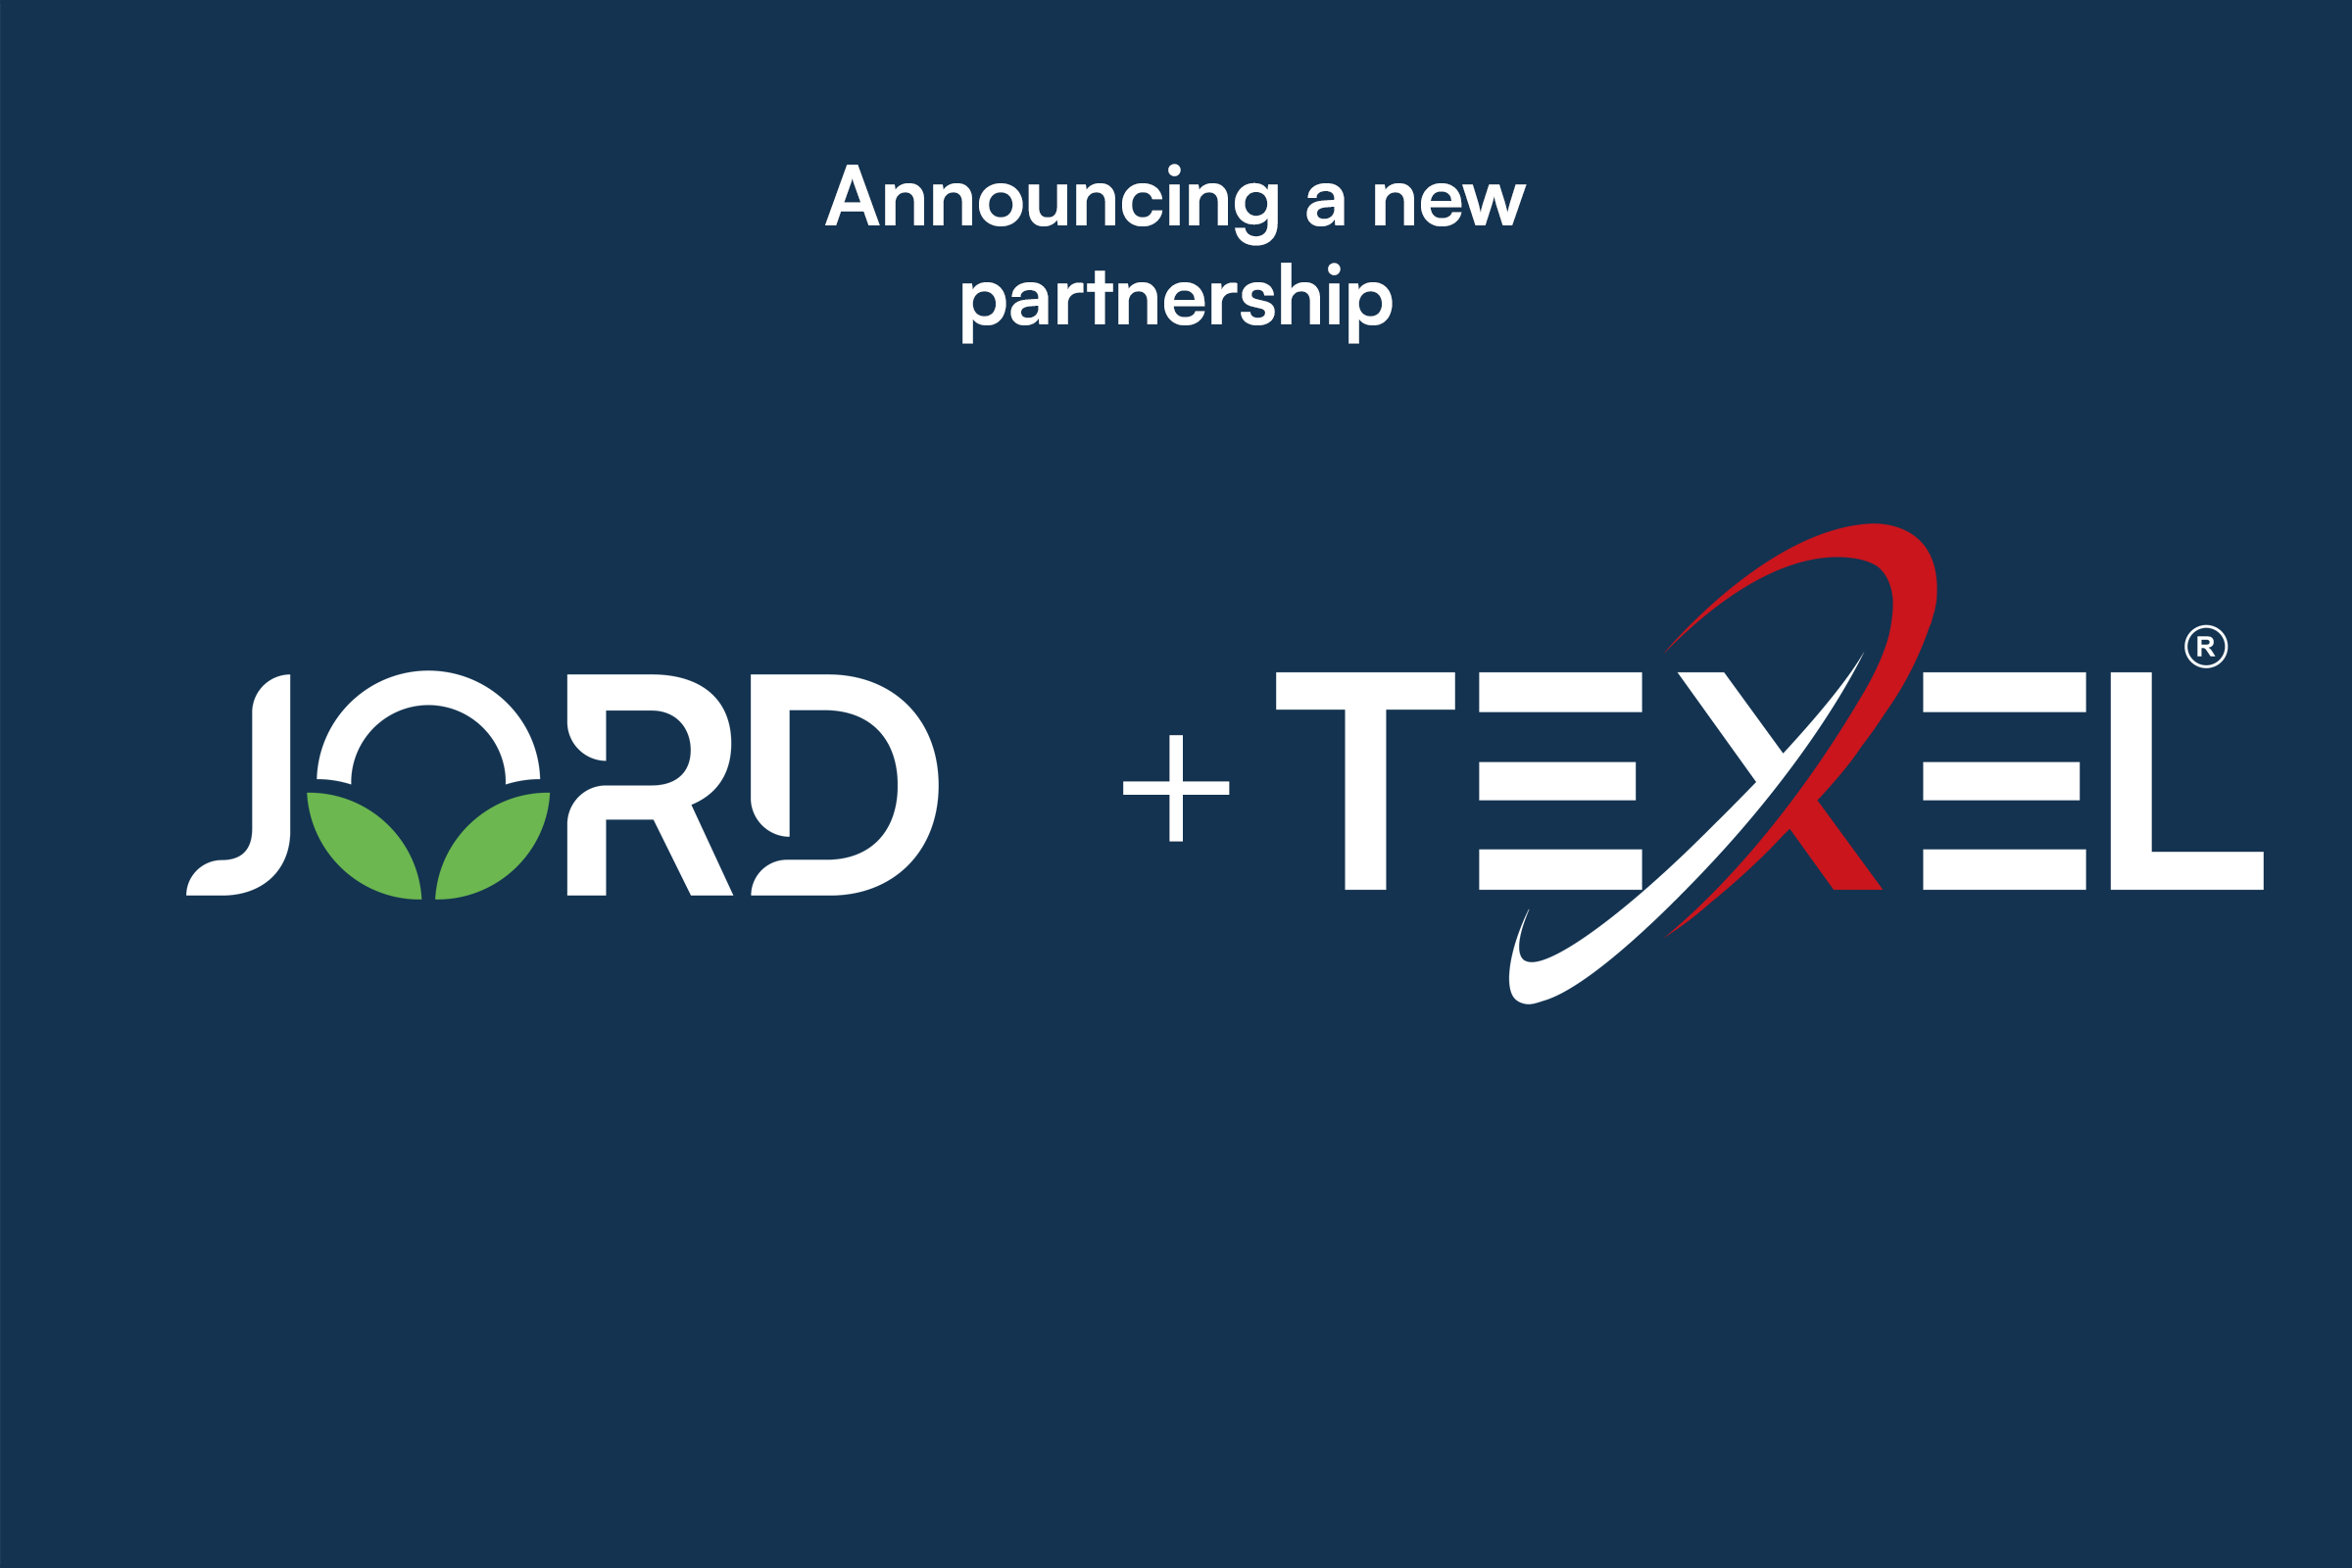 Jord and TEXEL Energy expand their partnership to convert rapid-growth C4-grass into scalable green electricity